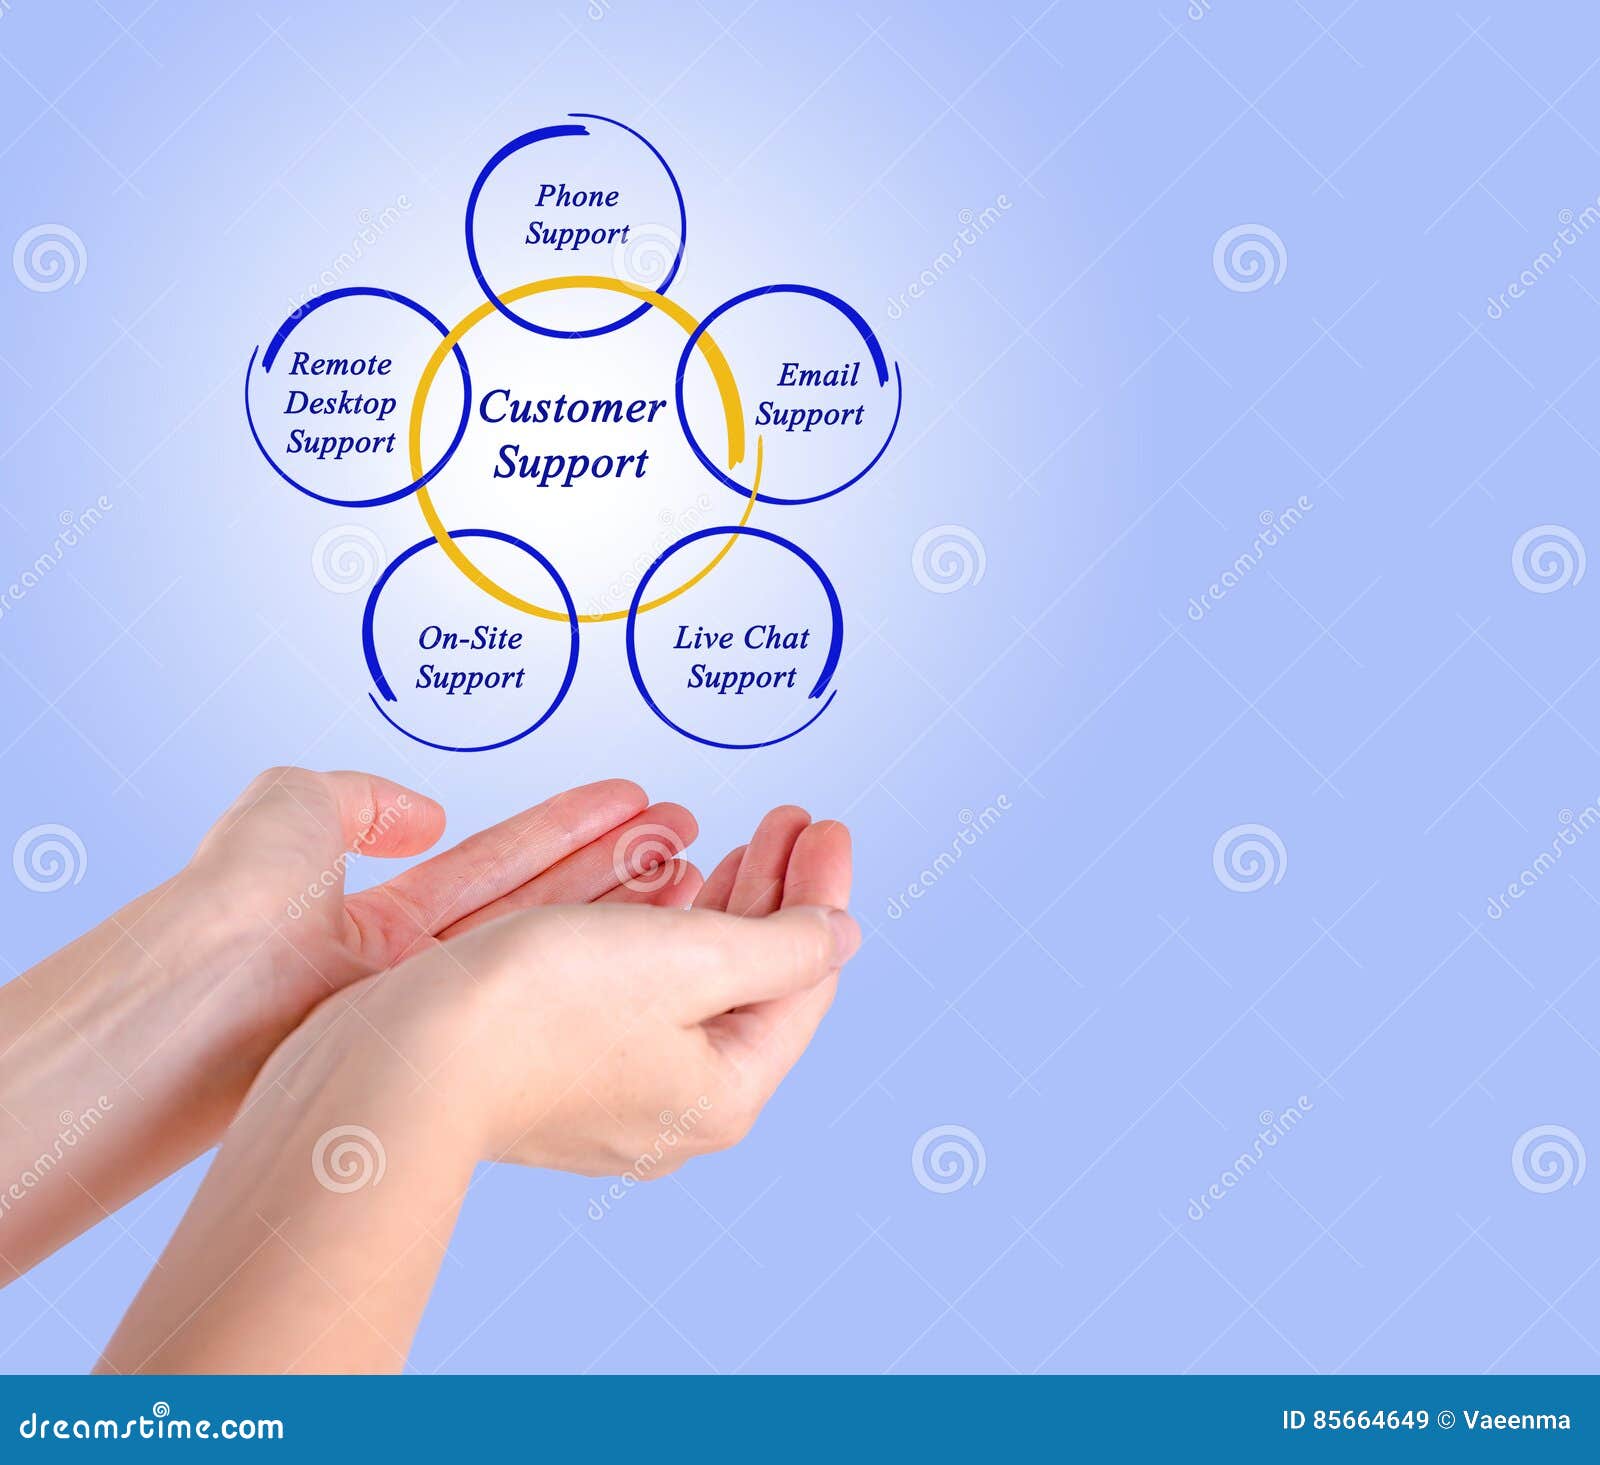 Sequence Diagram For Customer Support System